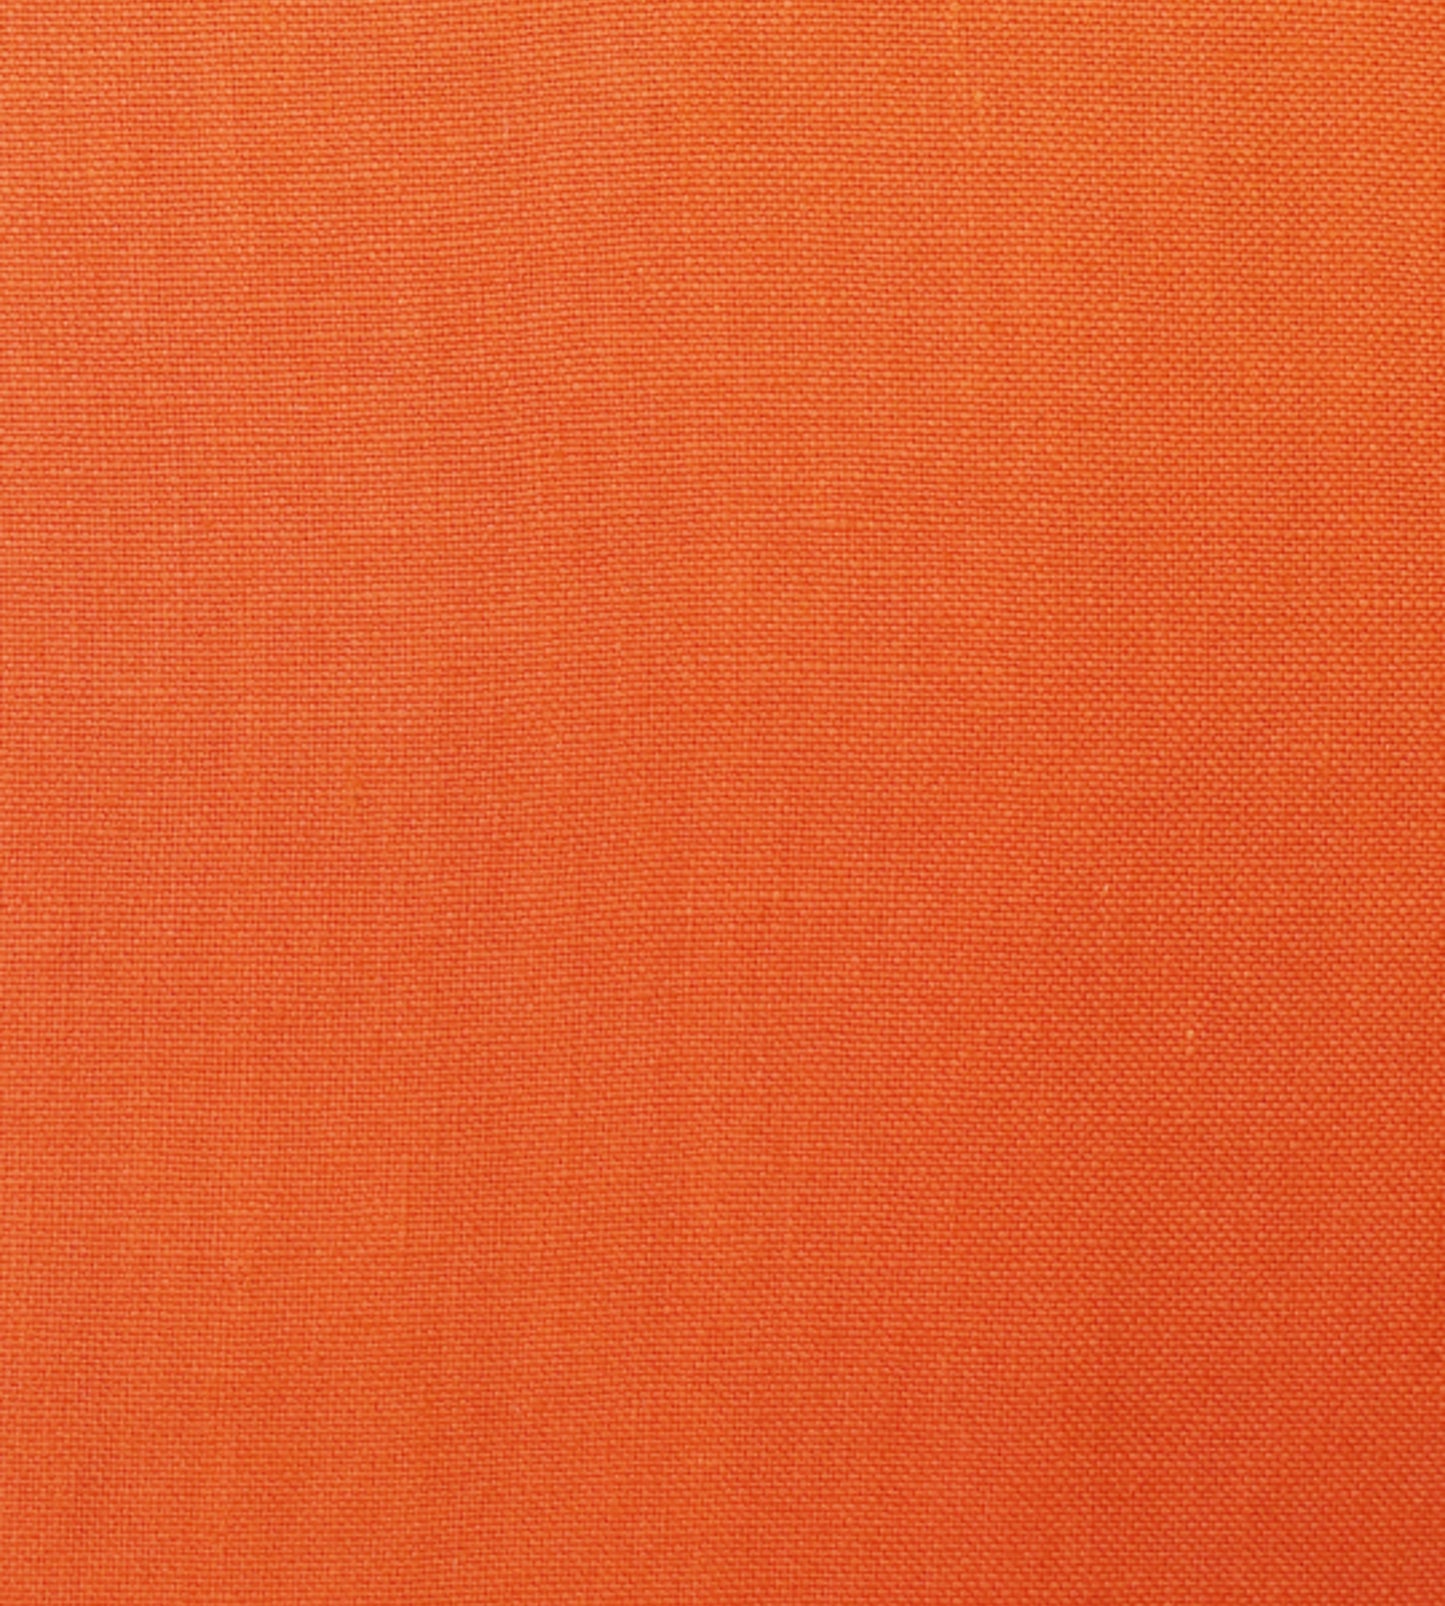 Purchase Scalamandre Fabric Pattern number SC 002527108, Toscana Linen Clementine 1